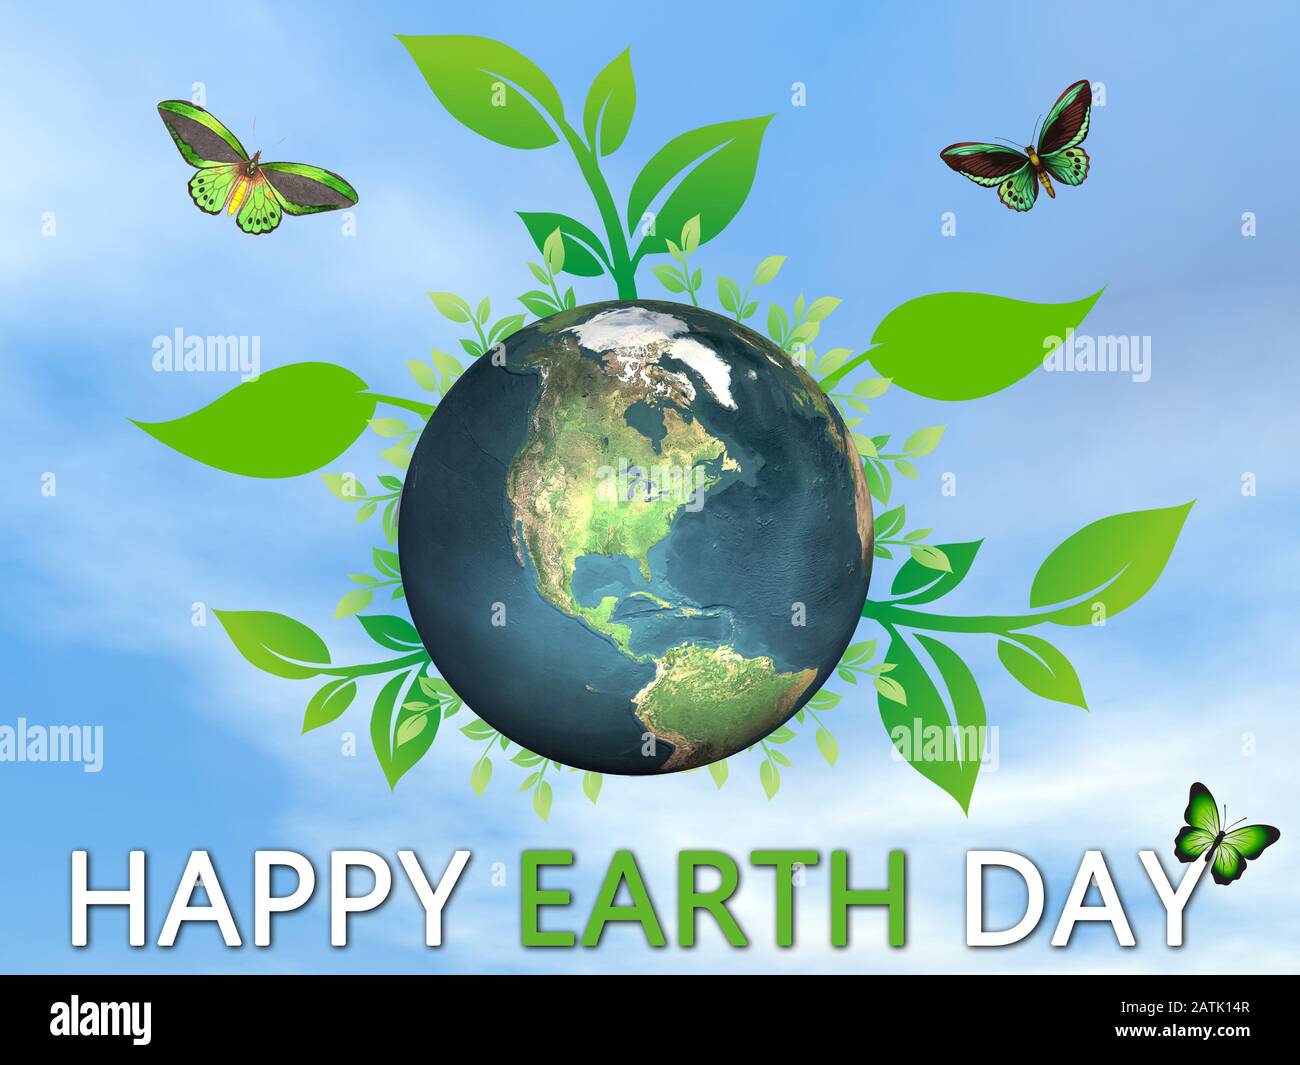 happy earth day quotes